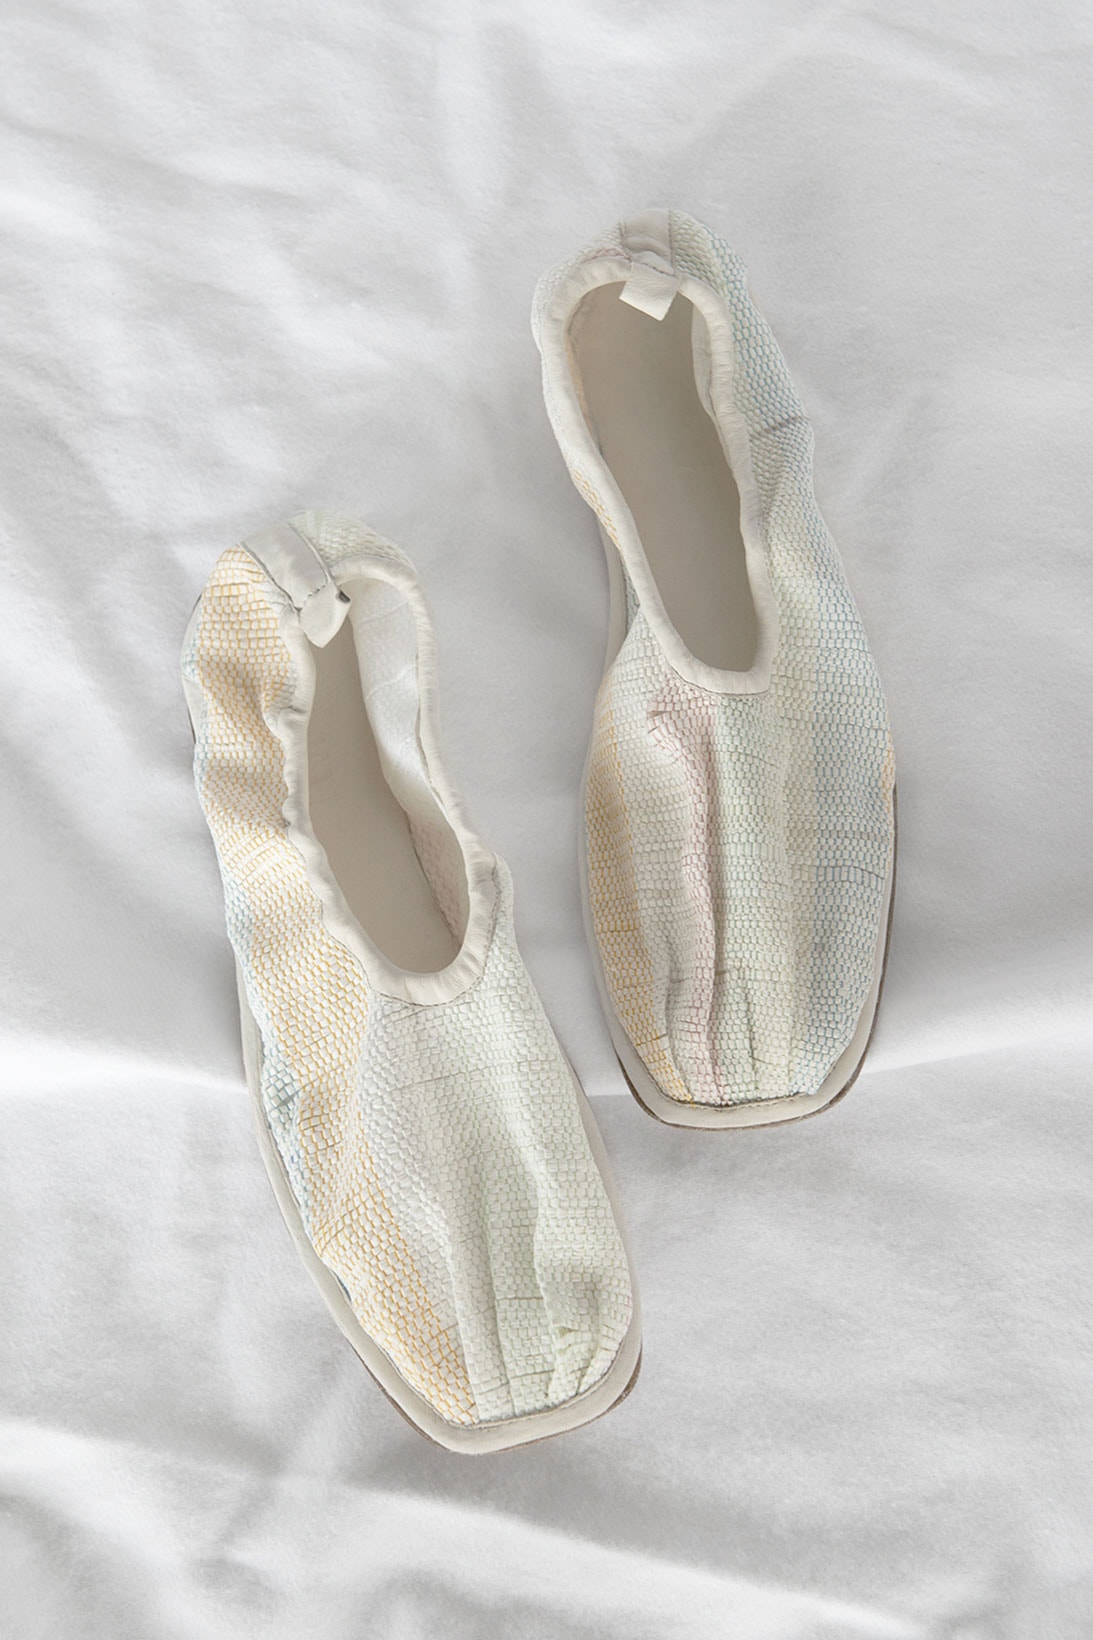 cecilie bahnsen hereu hyacinth flats shoes collaboration sustainable footwear off white